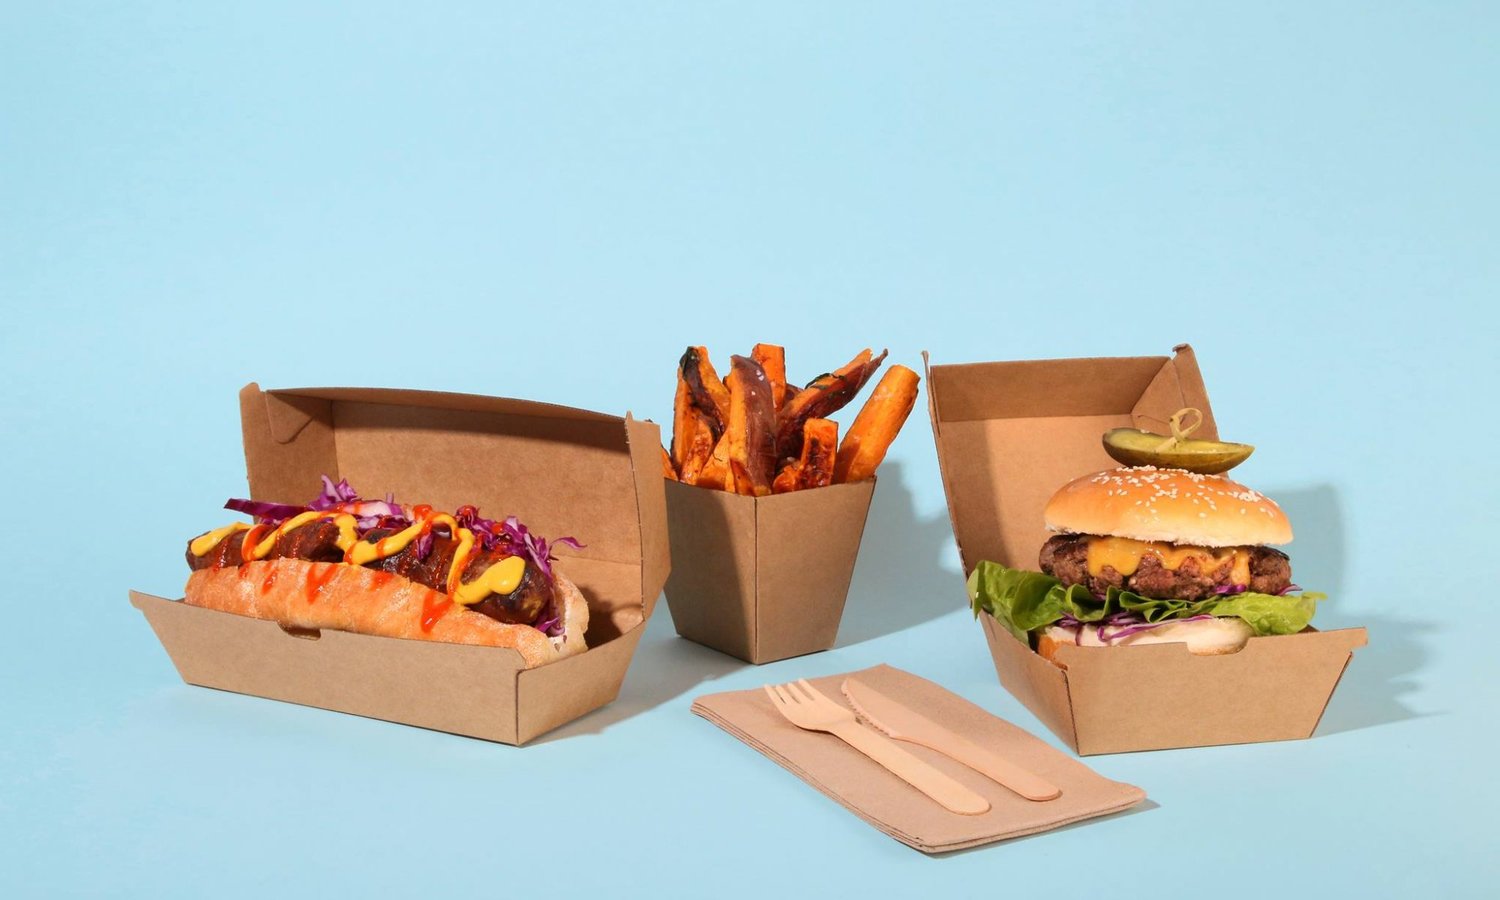 Consumers prefer Sustainable Packaging at Fast Food Restaurants